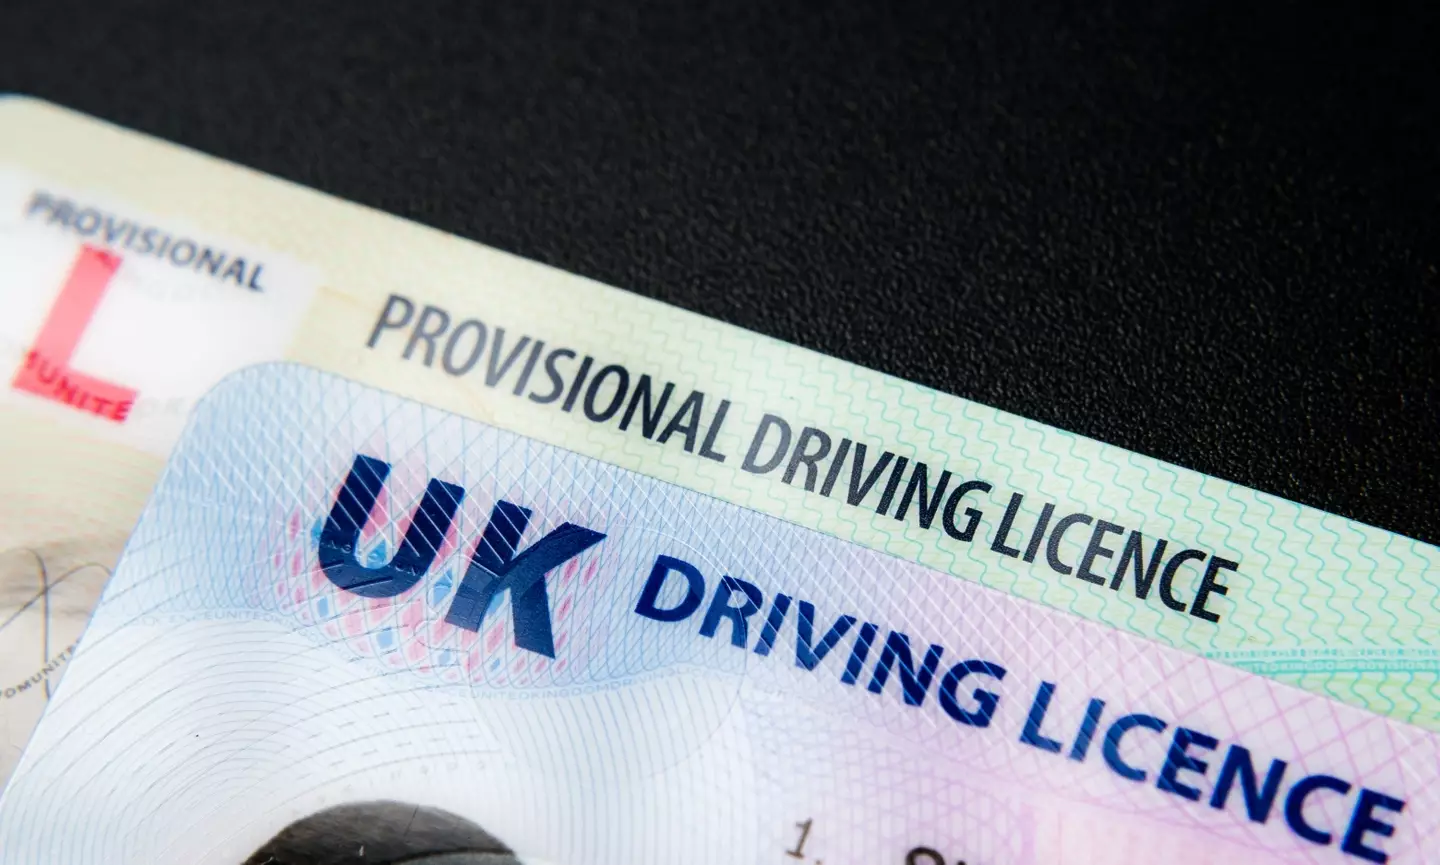 There are about two million Brits with expired licences, and they could face a £1,000 fine.